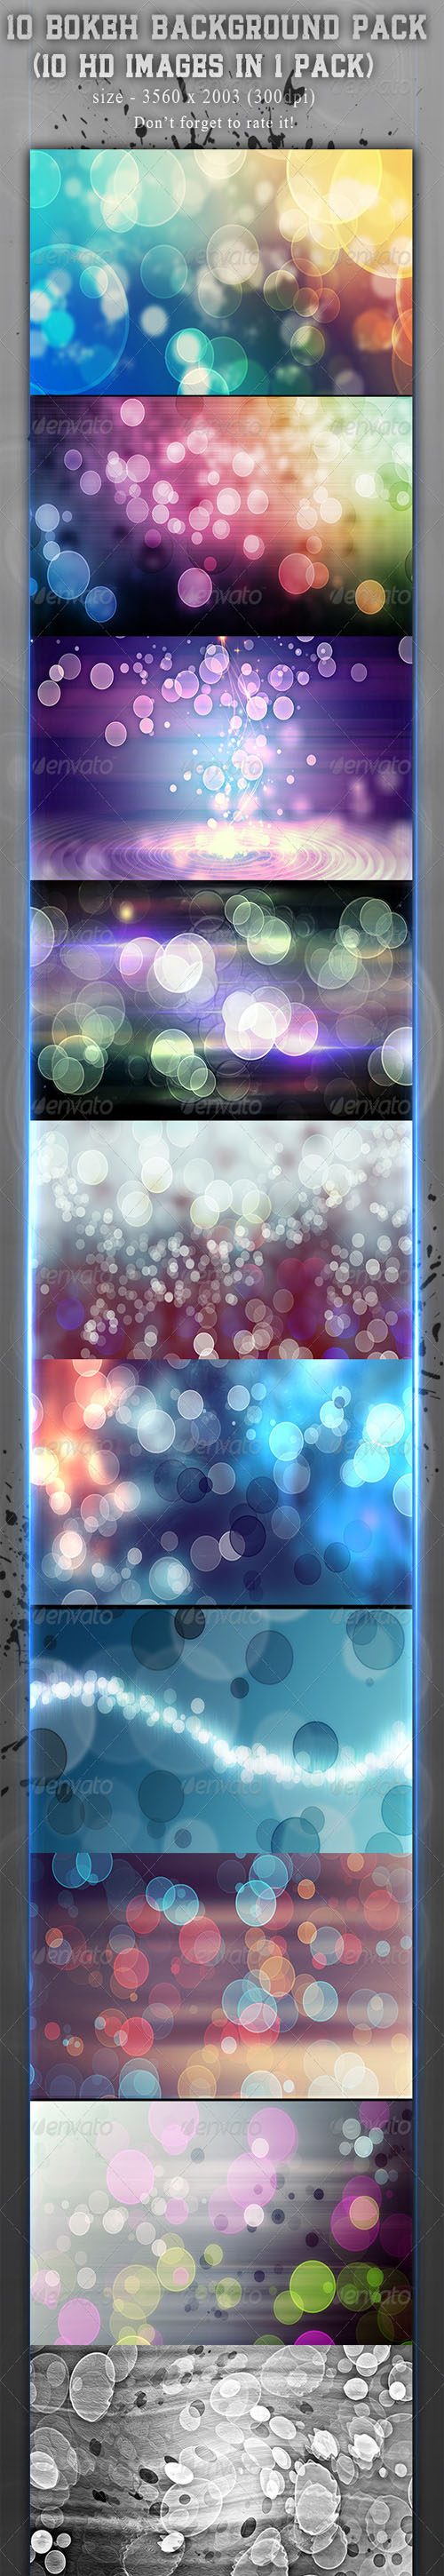 GraphicRiver - 10 Bokeh Backgrounds Pack